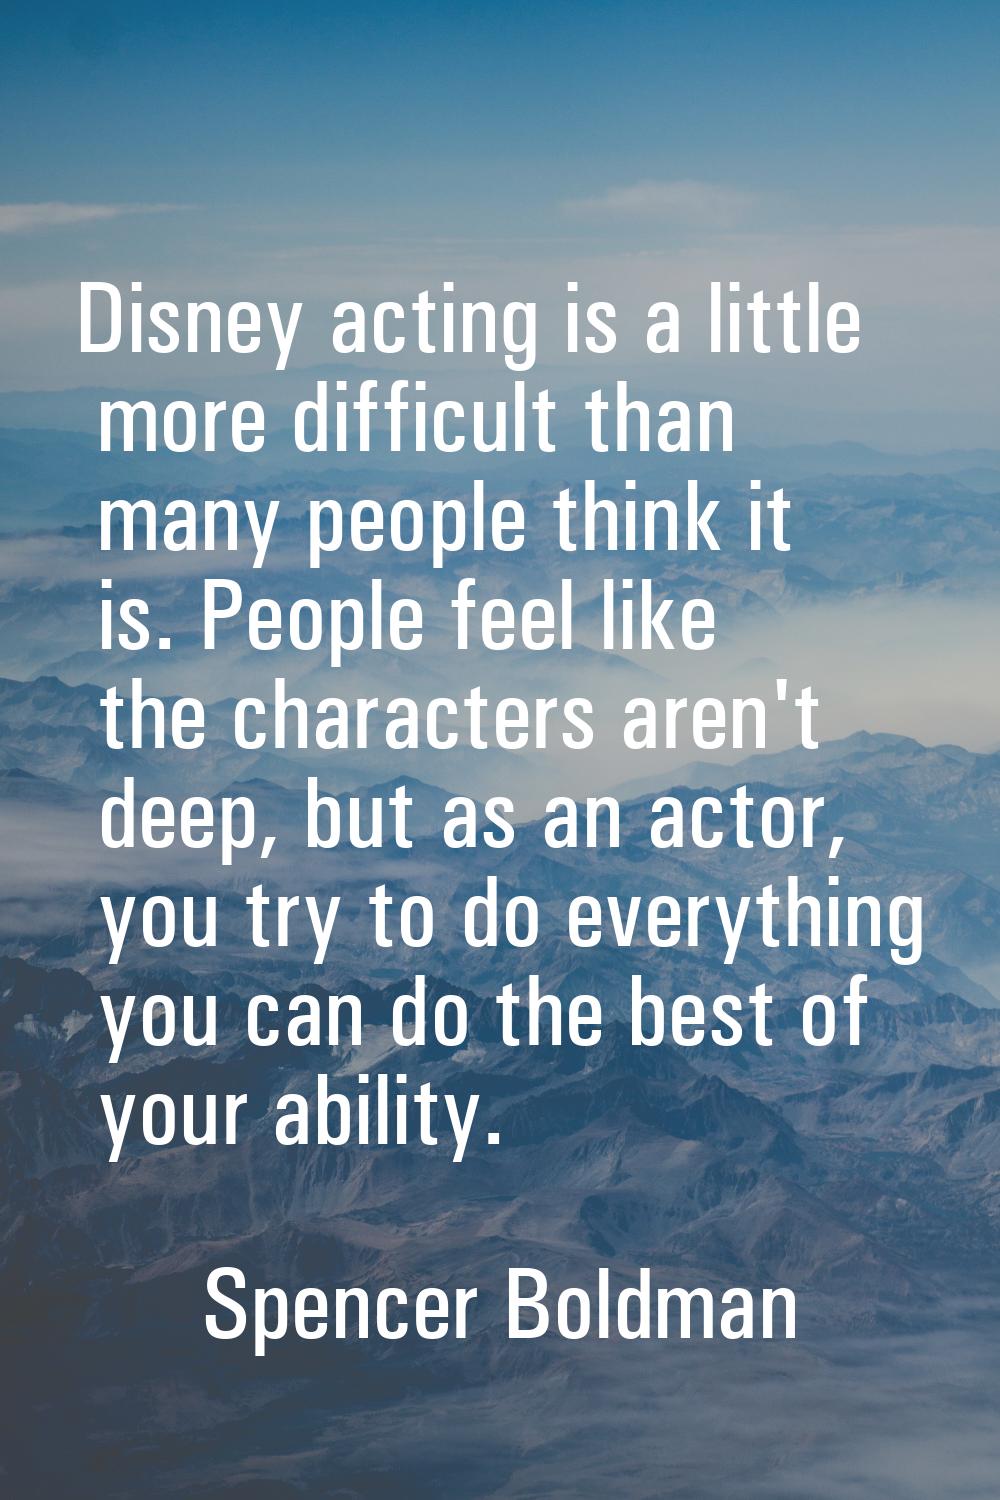 Disney acting is a little more difficult than many people think it is. People feel like the charact